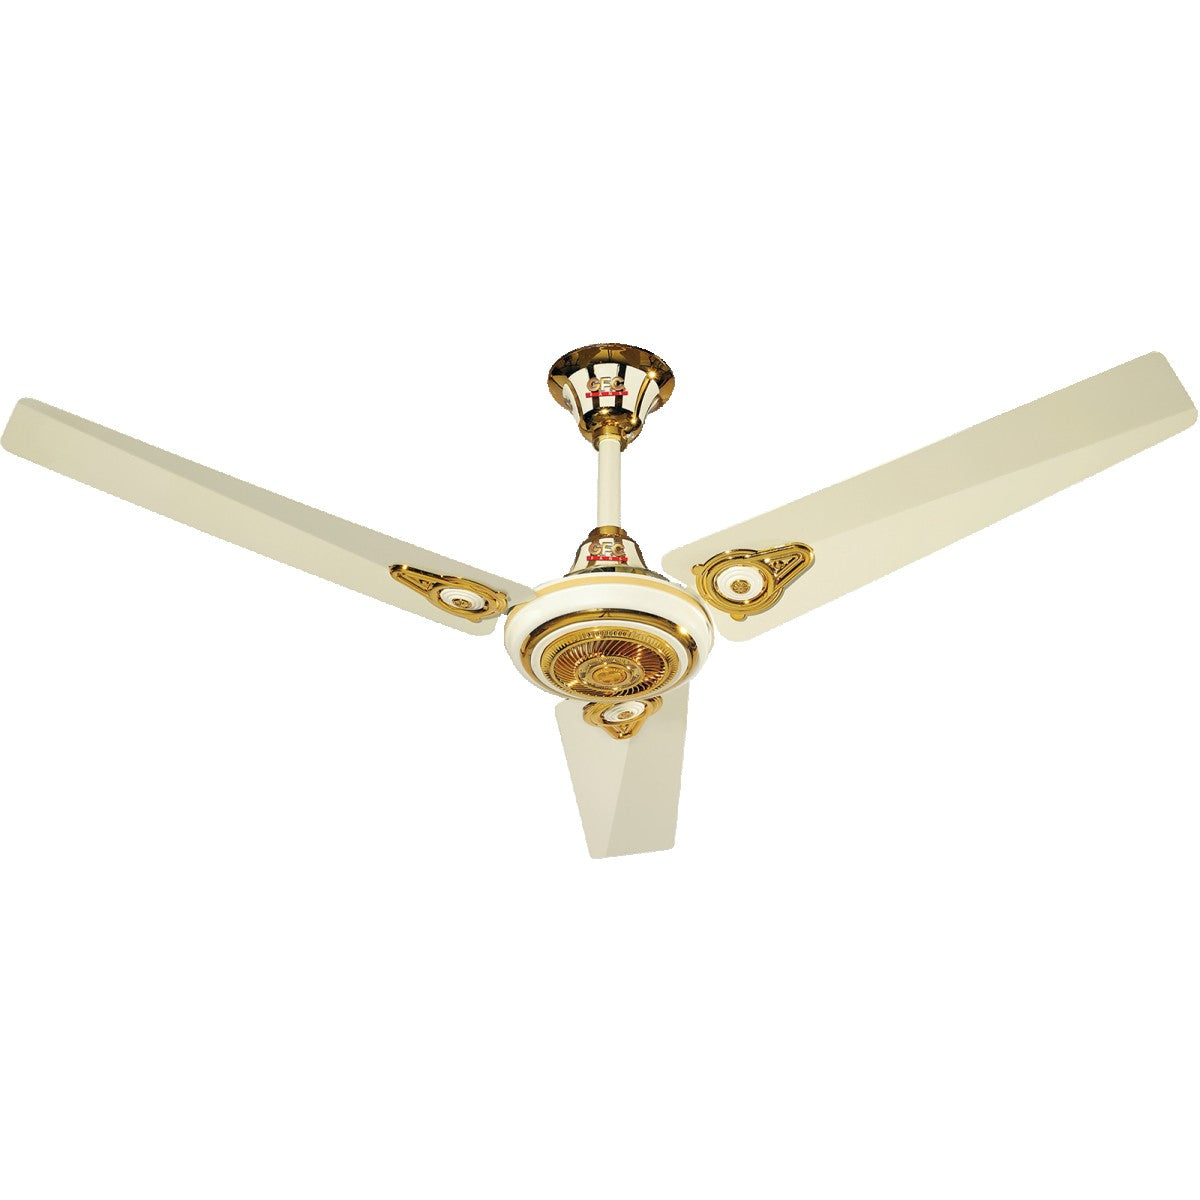 GFC Ceiling Fans VIP Model 56' Inch Superior quality aluminum alloy construction Brand Warranty